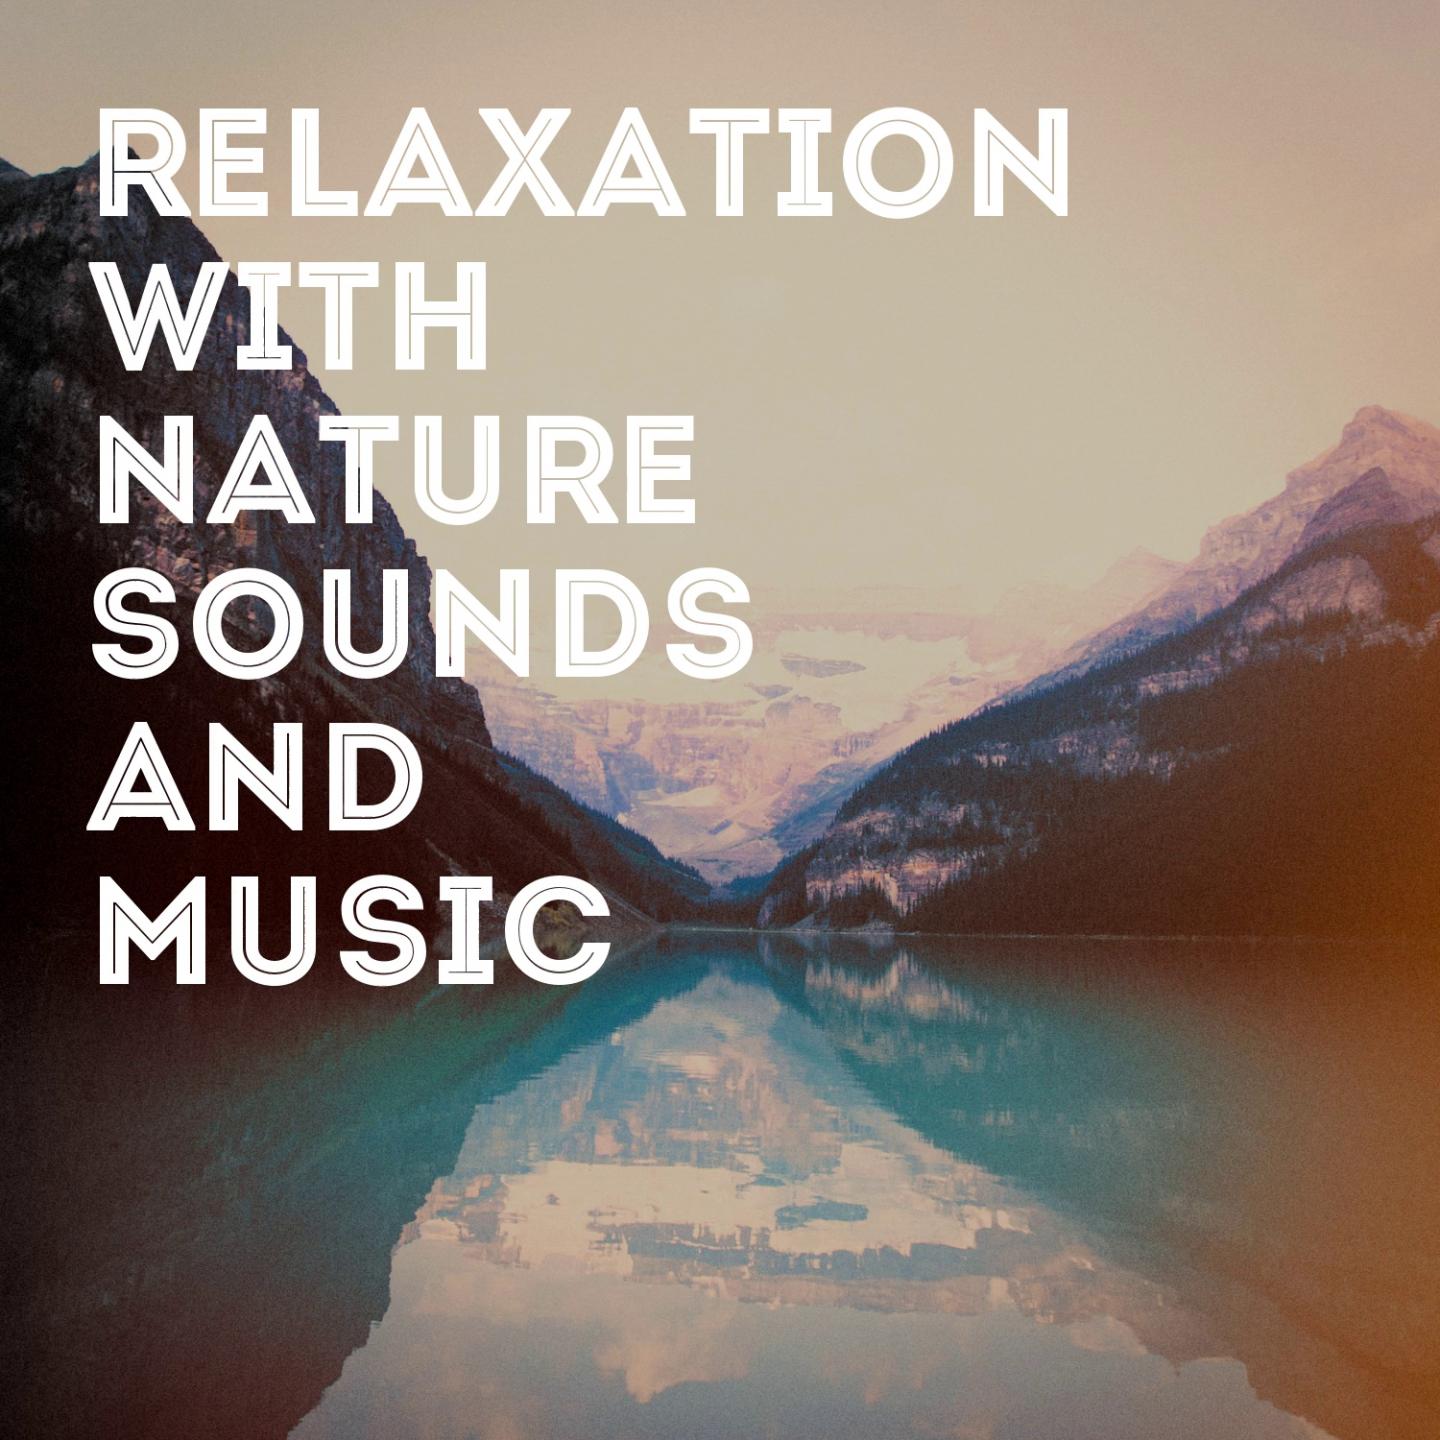 Relaxation with Nature Sounds and Music